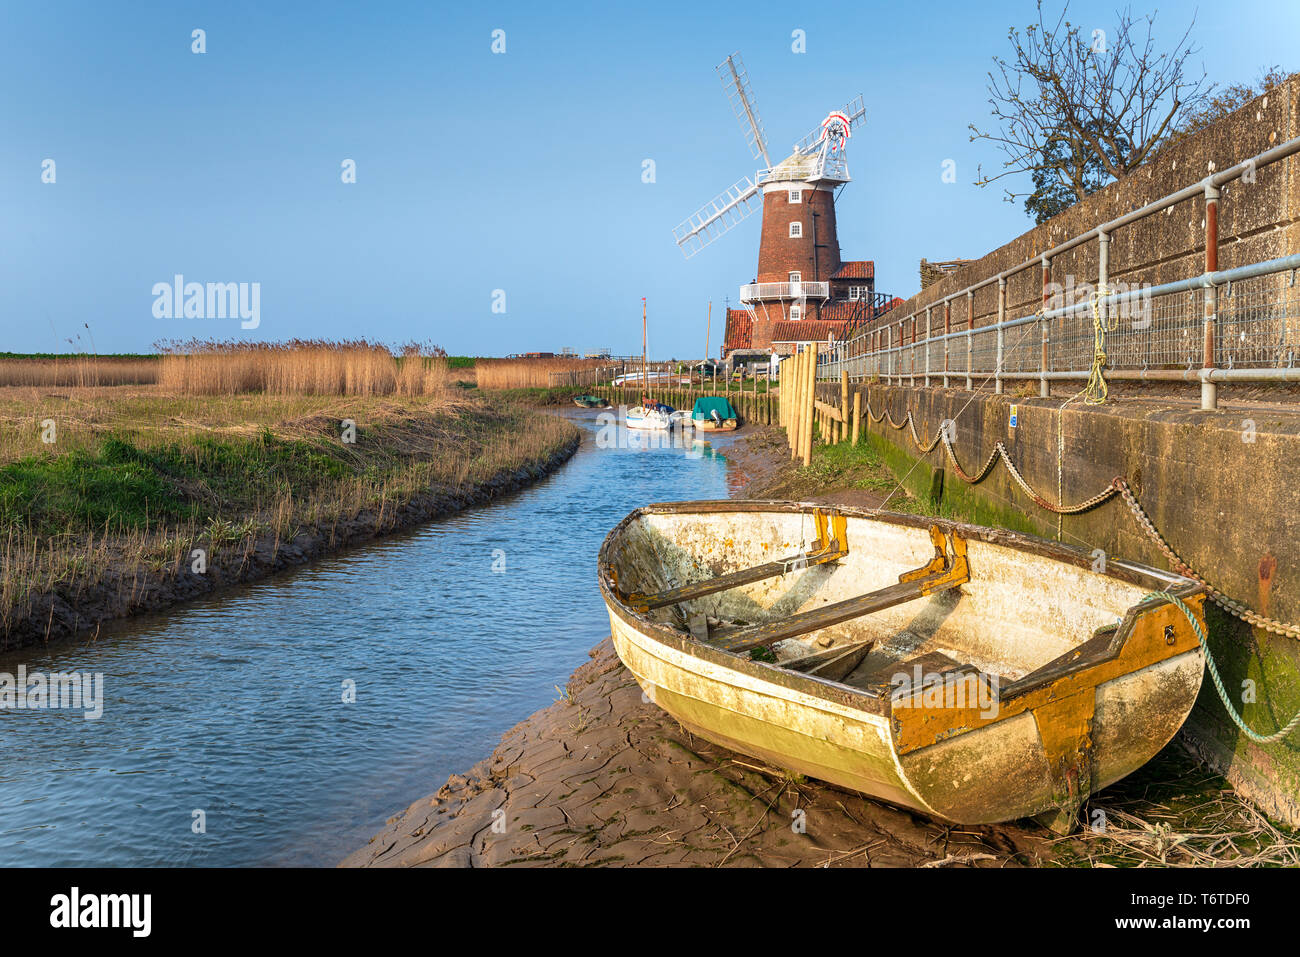 Thr river Glaven at Cley windmill on the north coast if Norfolk Stock Photo